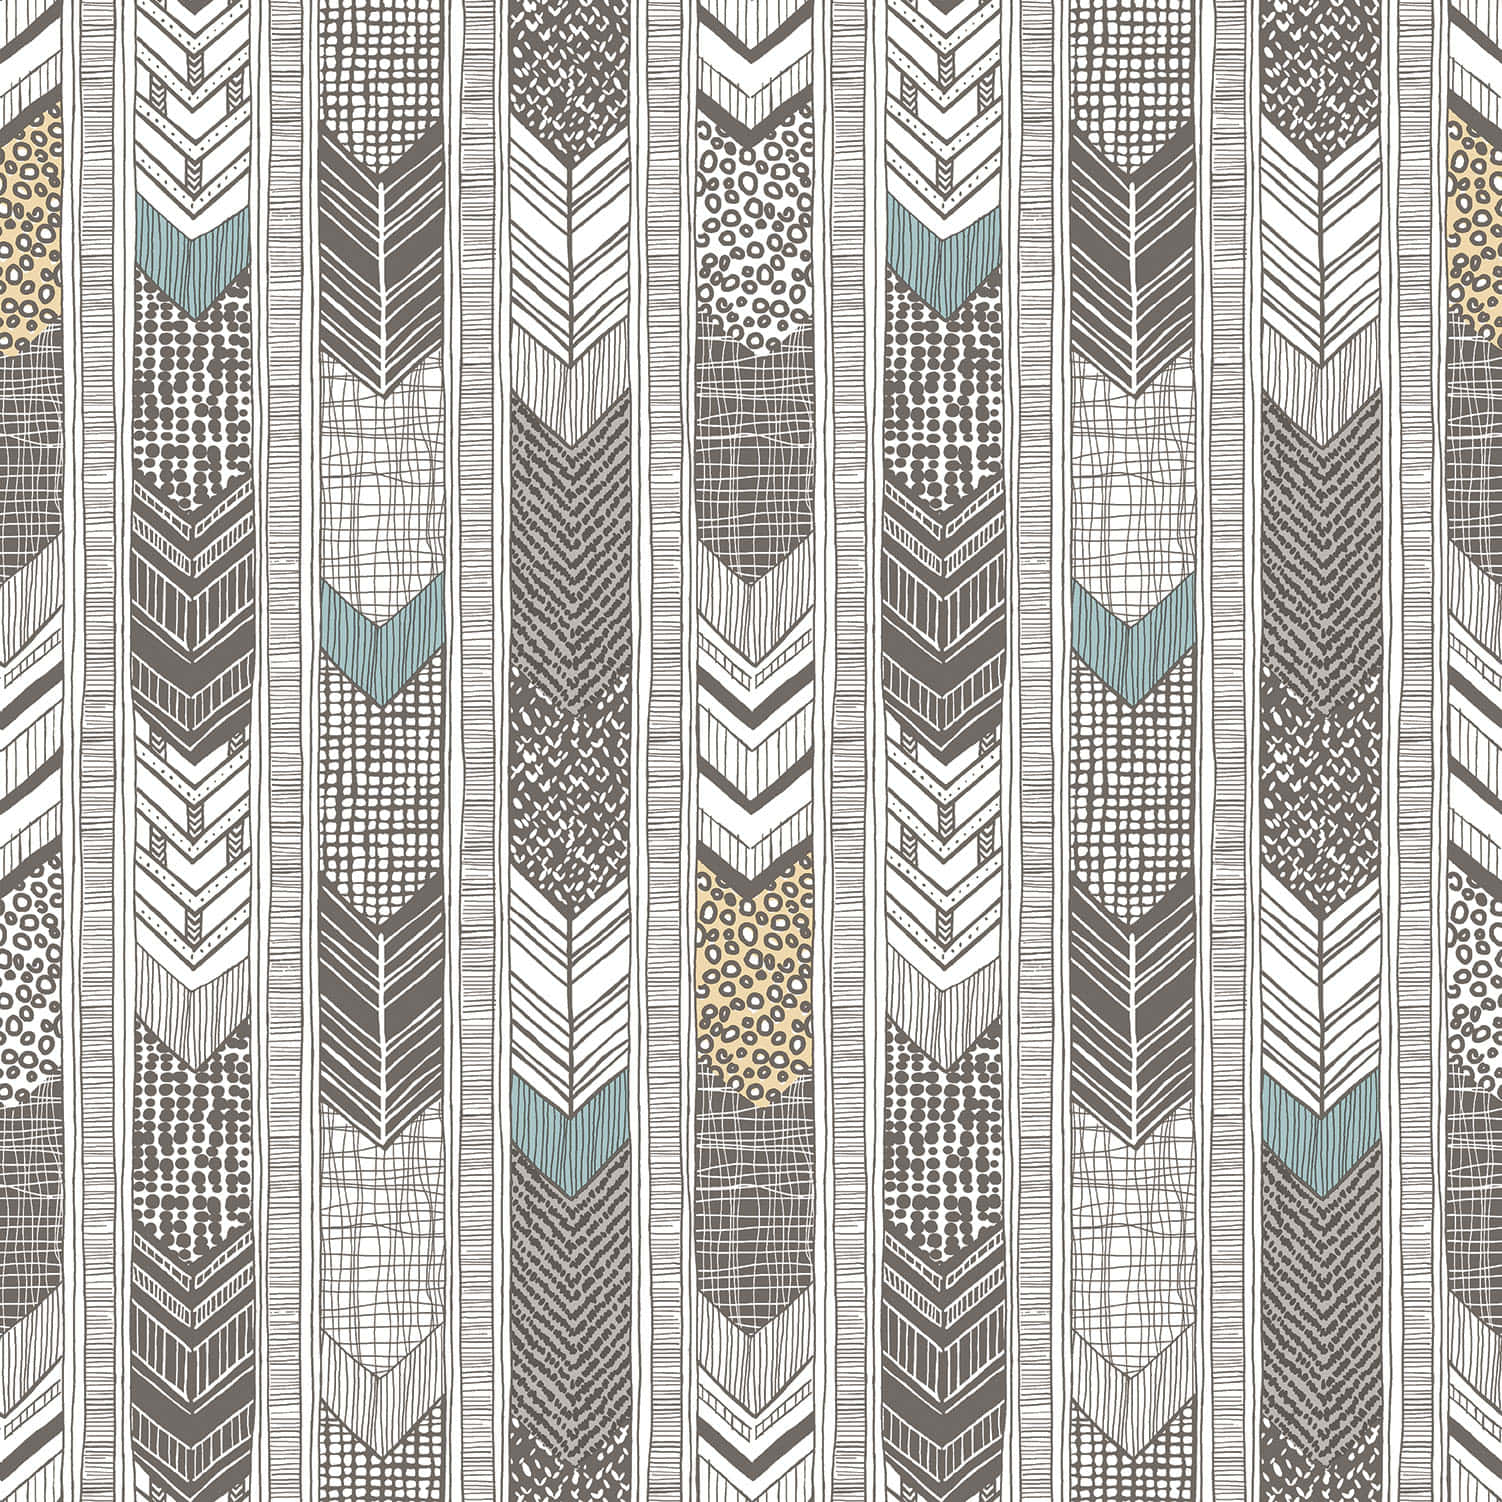 Honor your culture and heritage by embracing your native roots Wallpaper